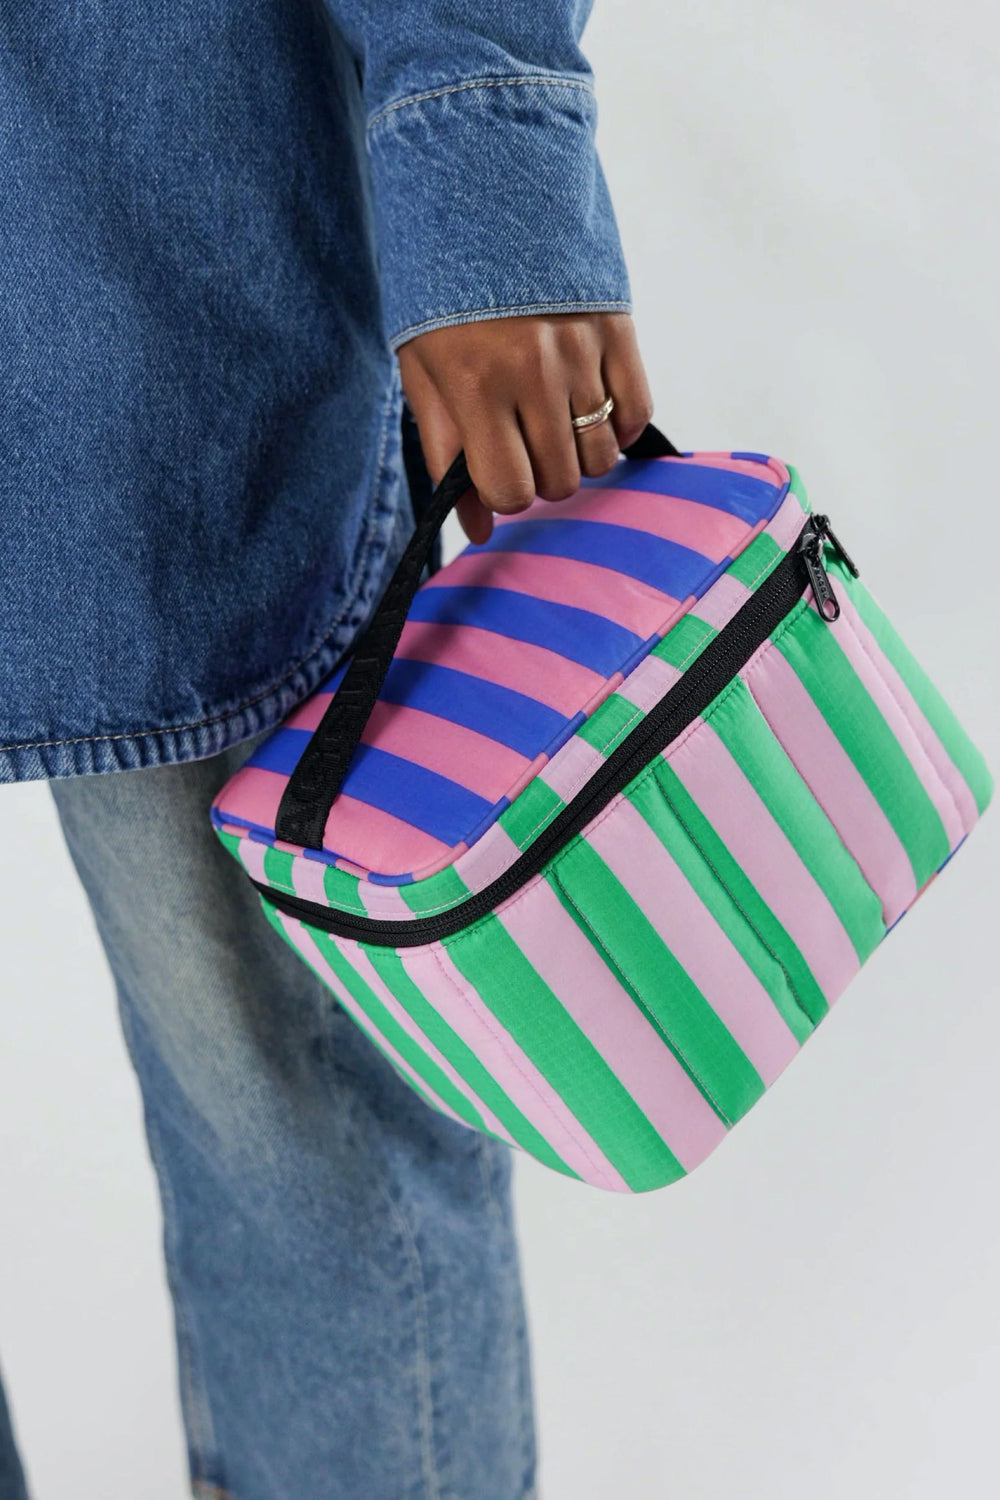 Awning Stripes Mix Puffy Lunch Bag